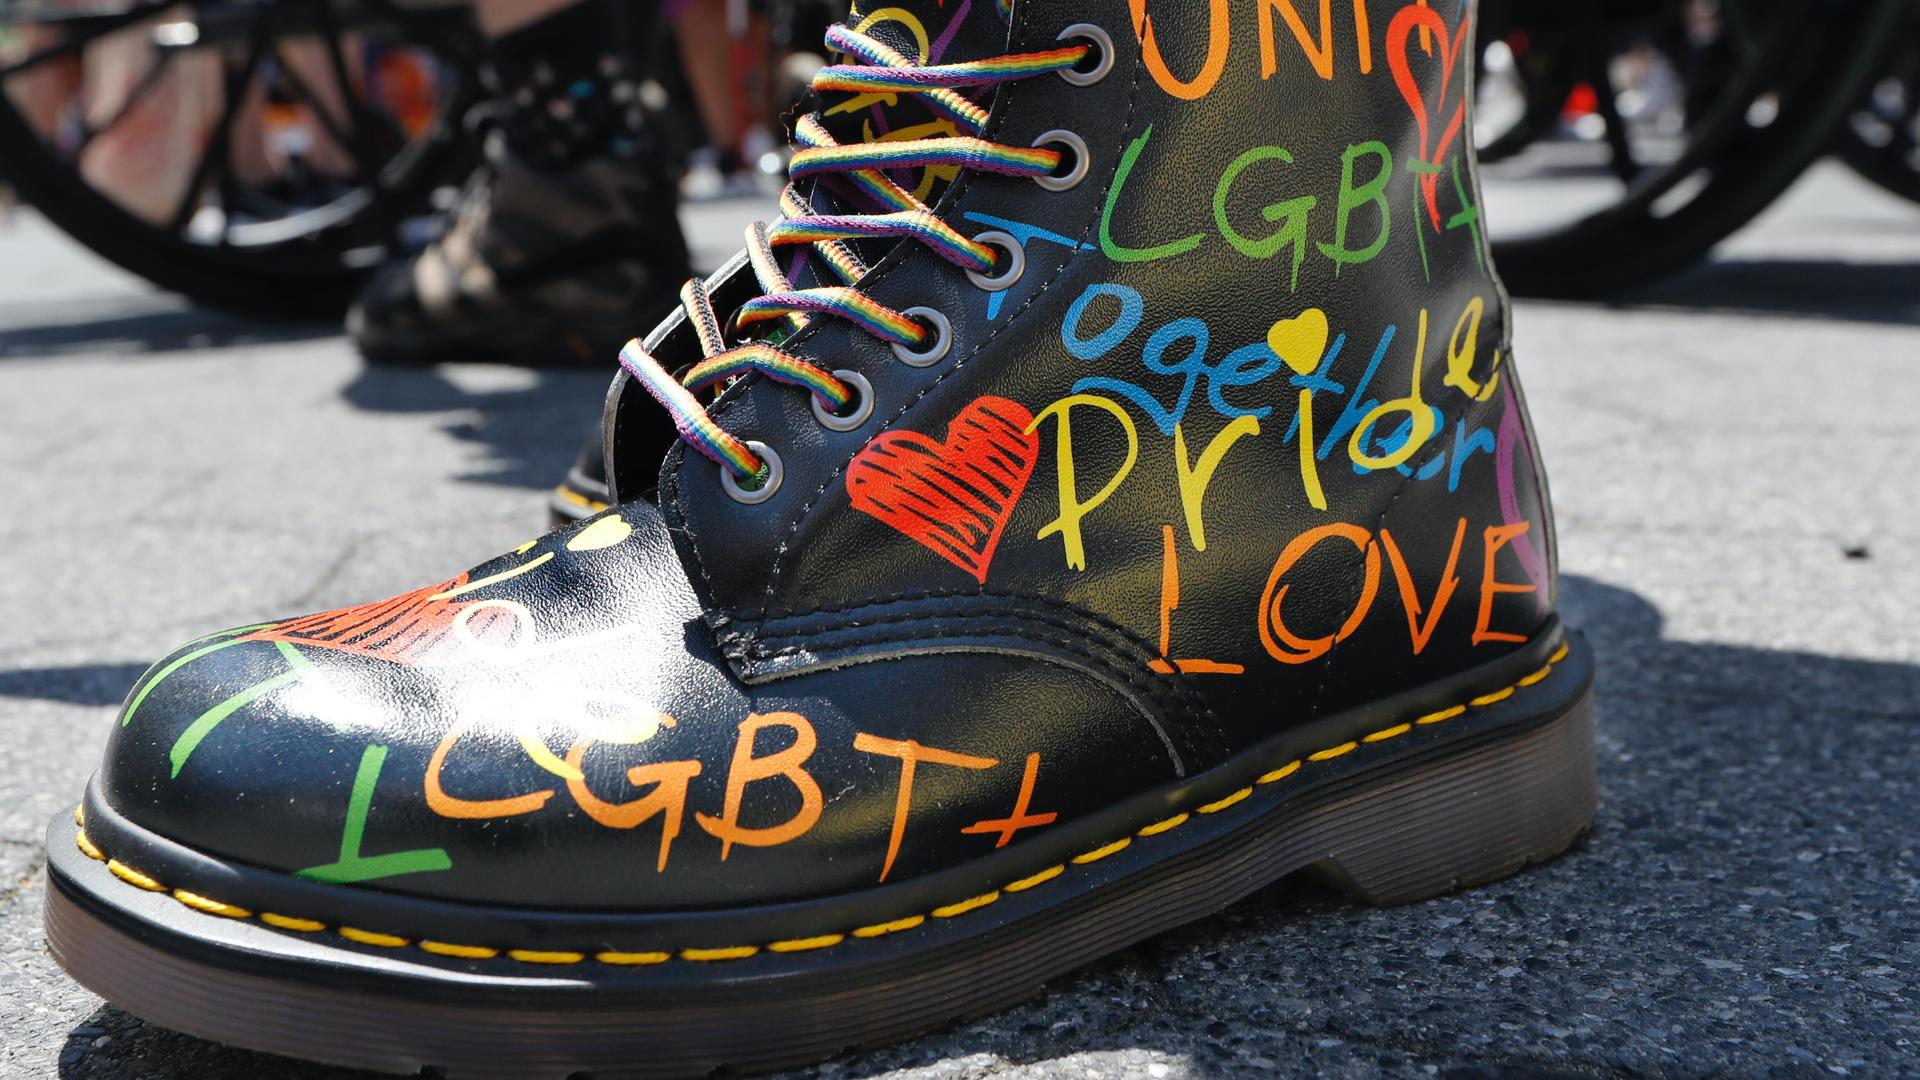 A person wears colorful, pride-themed boots as they await the start of a queer liberation march for Black Lives Matter and against police brutality